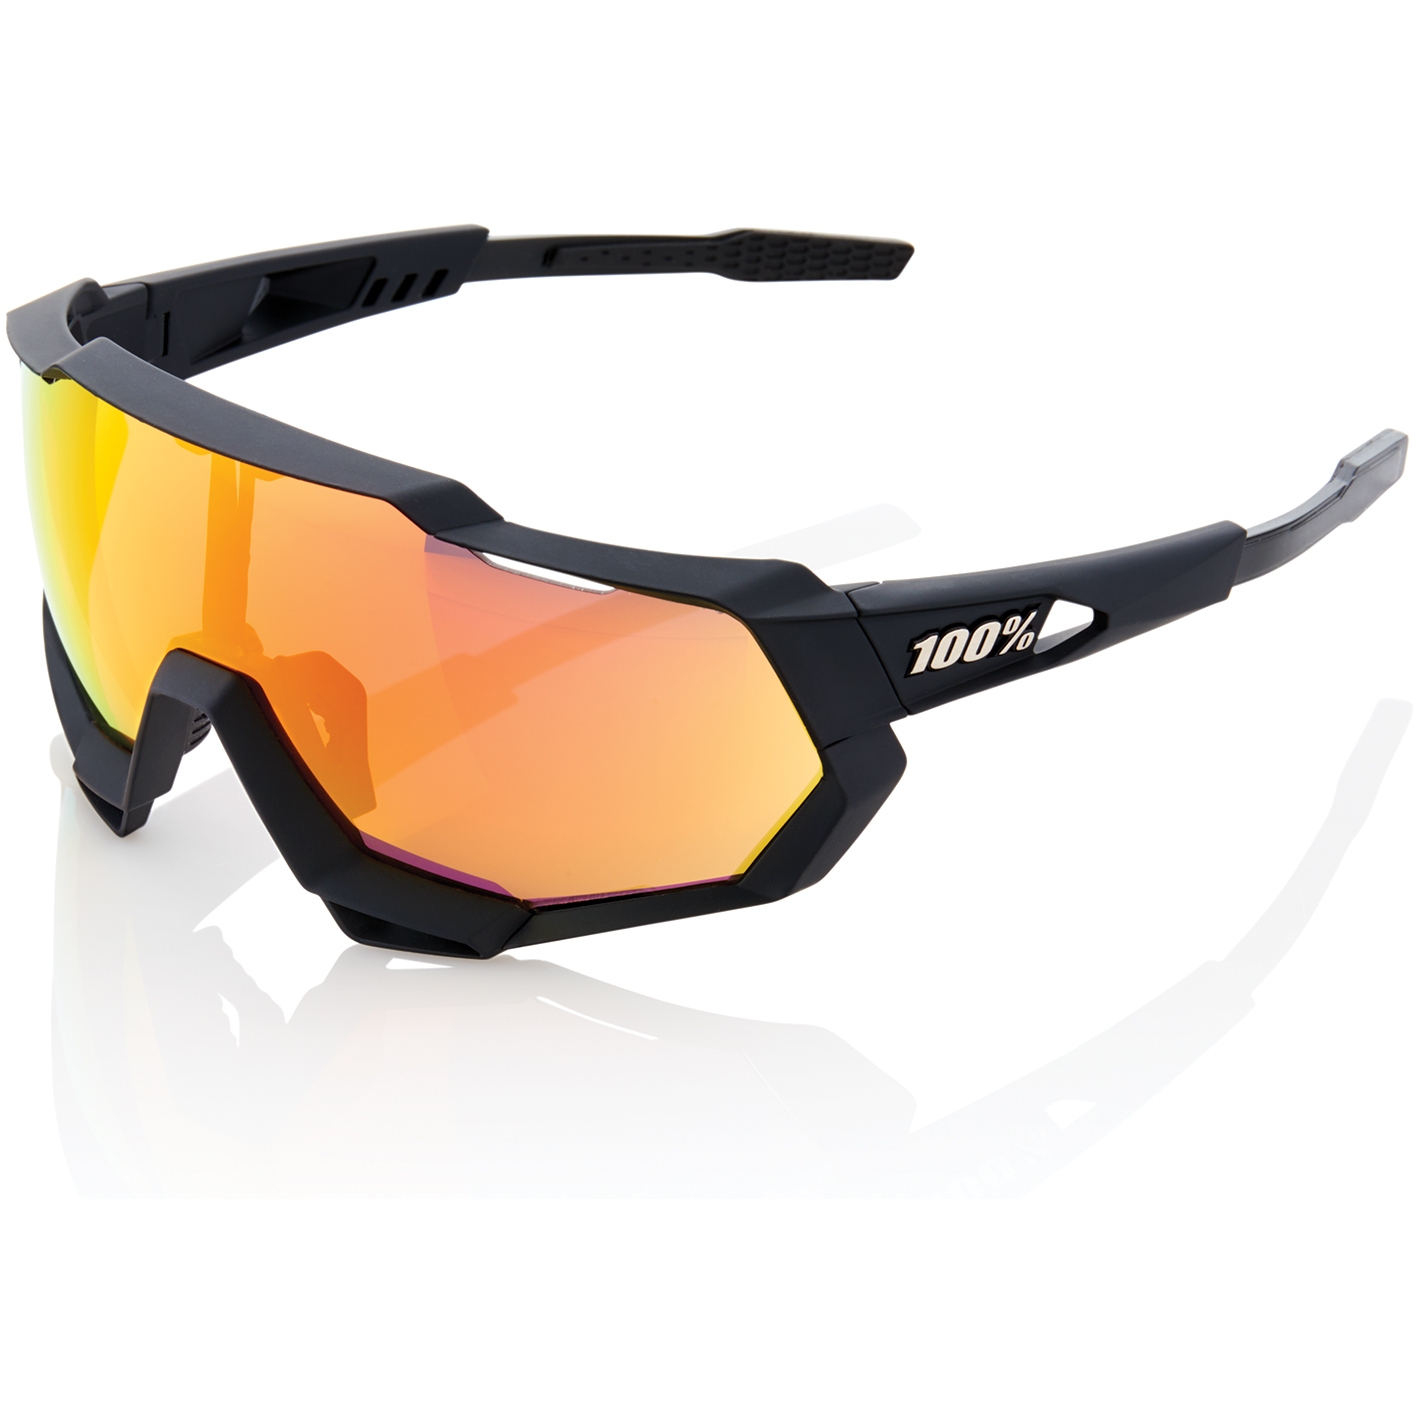 Productfoto van 100% Speedtrap Glasses - HiPER Mirror Lens - Soft Tact Black / Red Multilayer + Clear